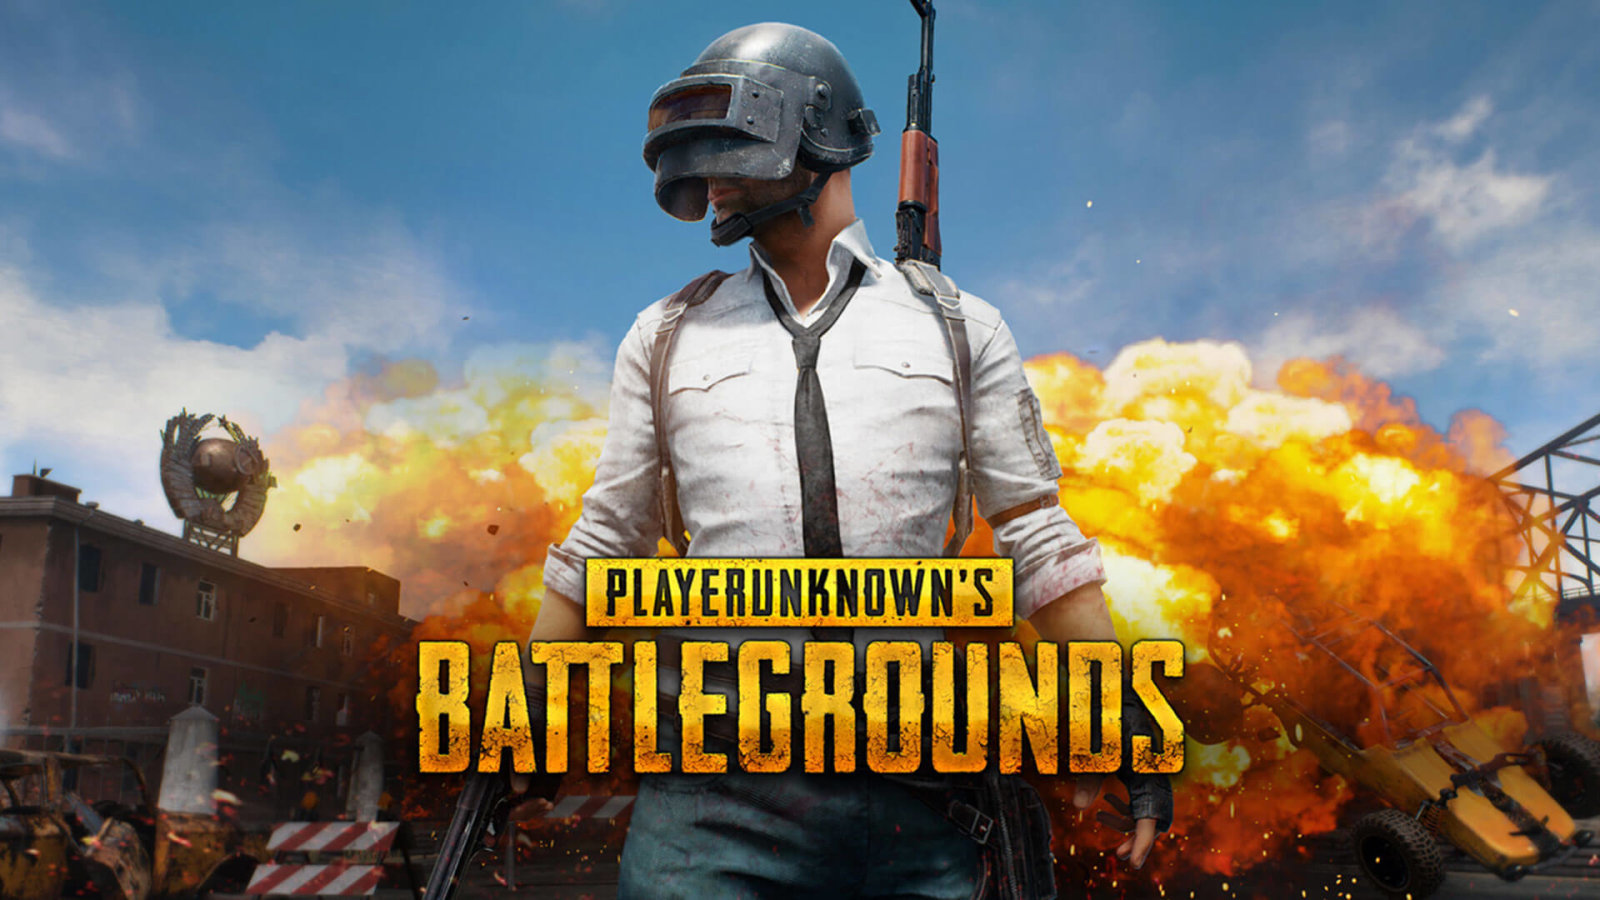 How to Get free UC for PUBG mobile (October 2019) via pubg ... - 